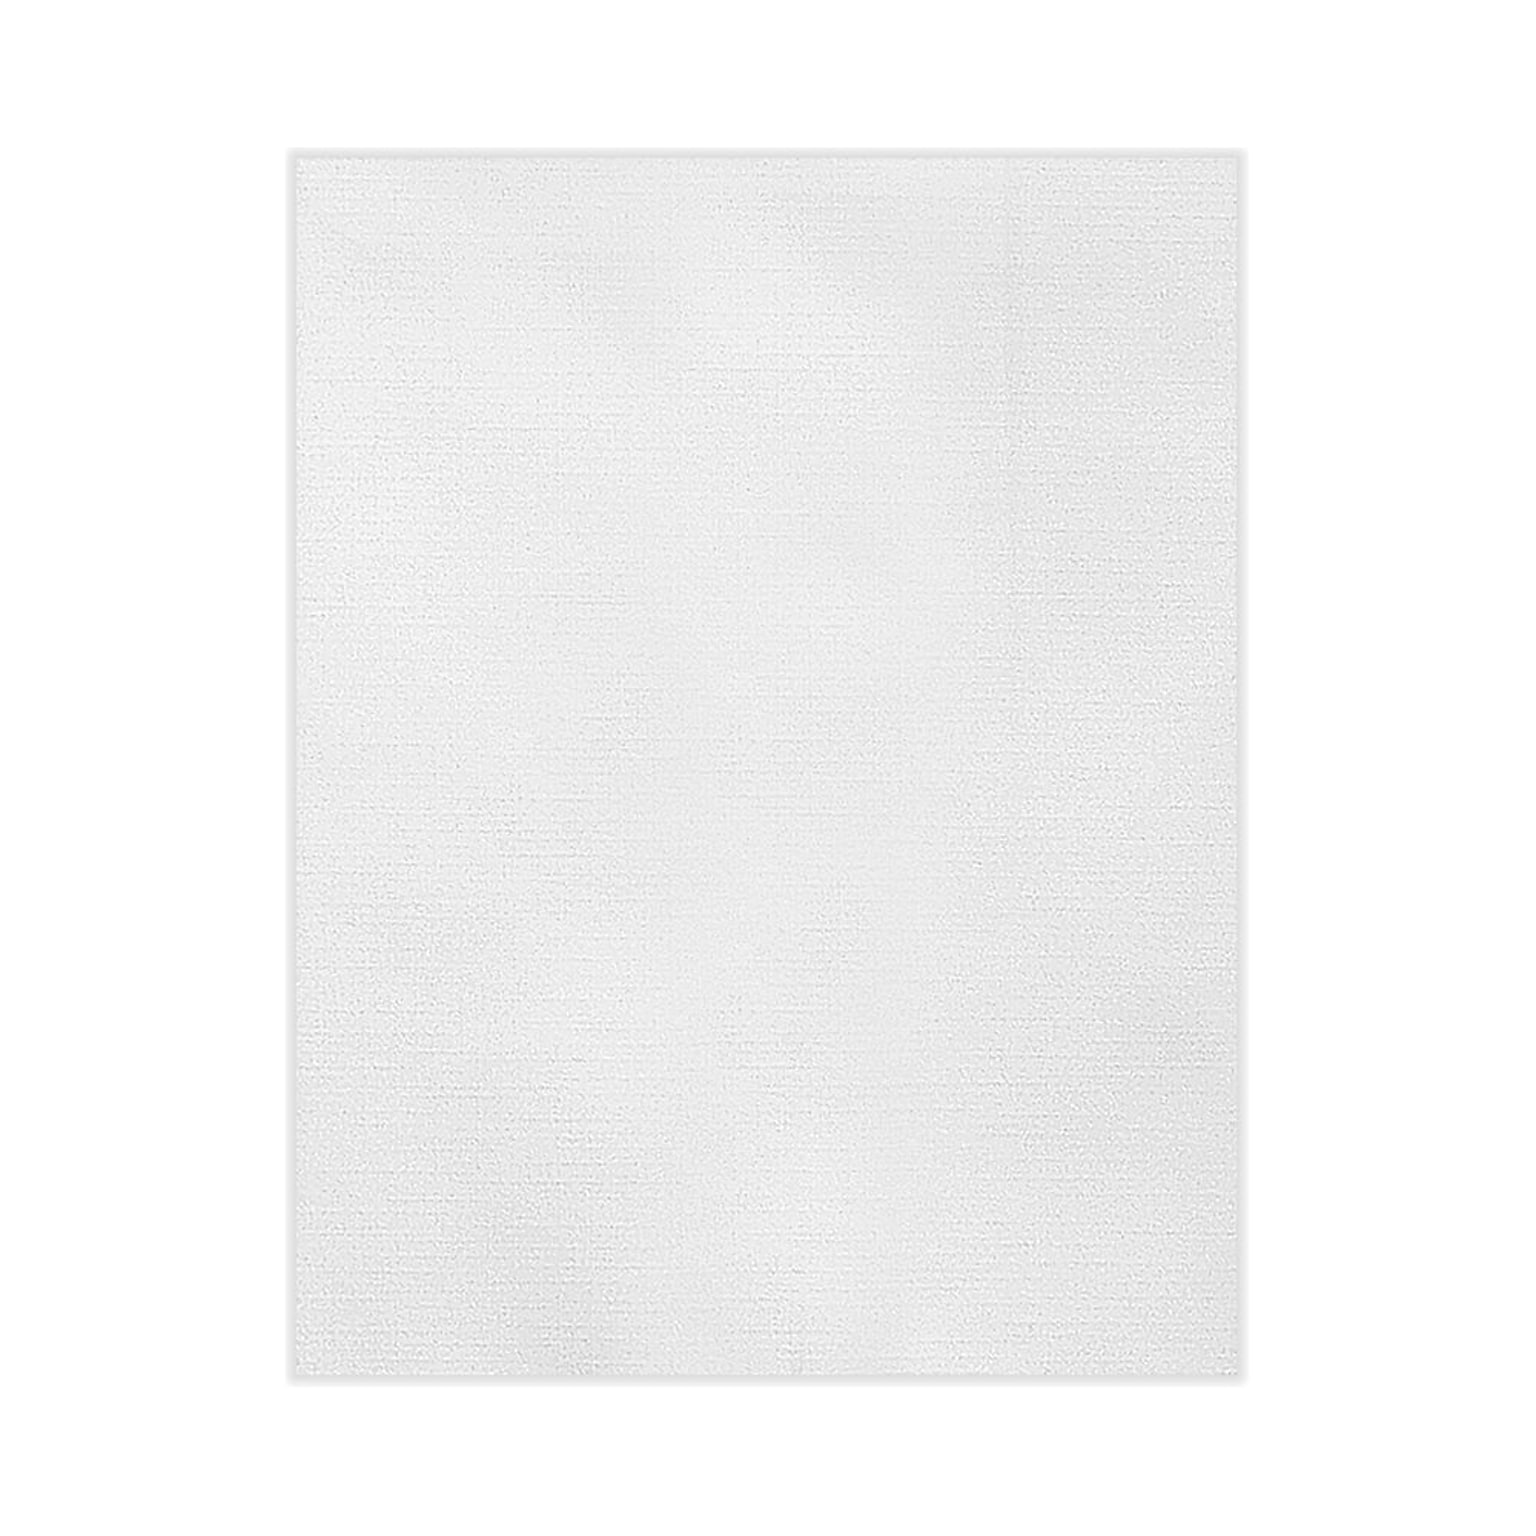 Lux Cardstock, 110 lb,  8.5 x 11, White Linen, 50/Pack